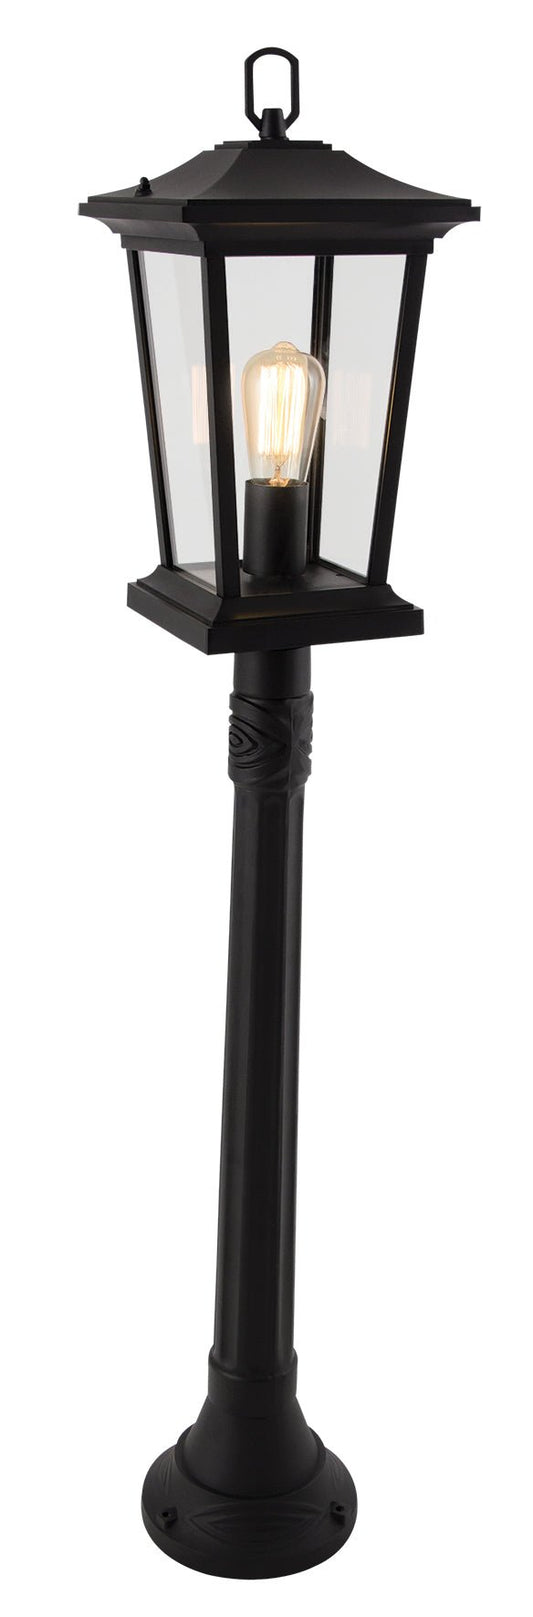 Aluminium Standing Lantern with Clear Glass - Lifespace